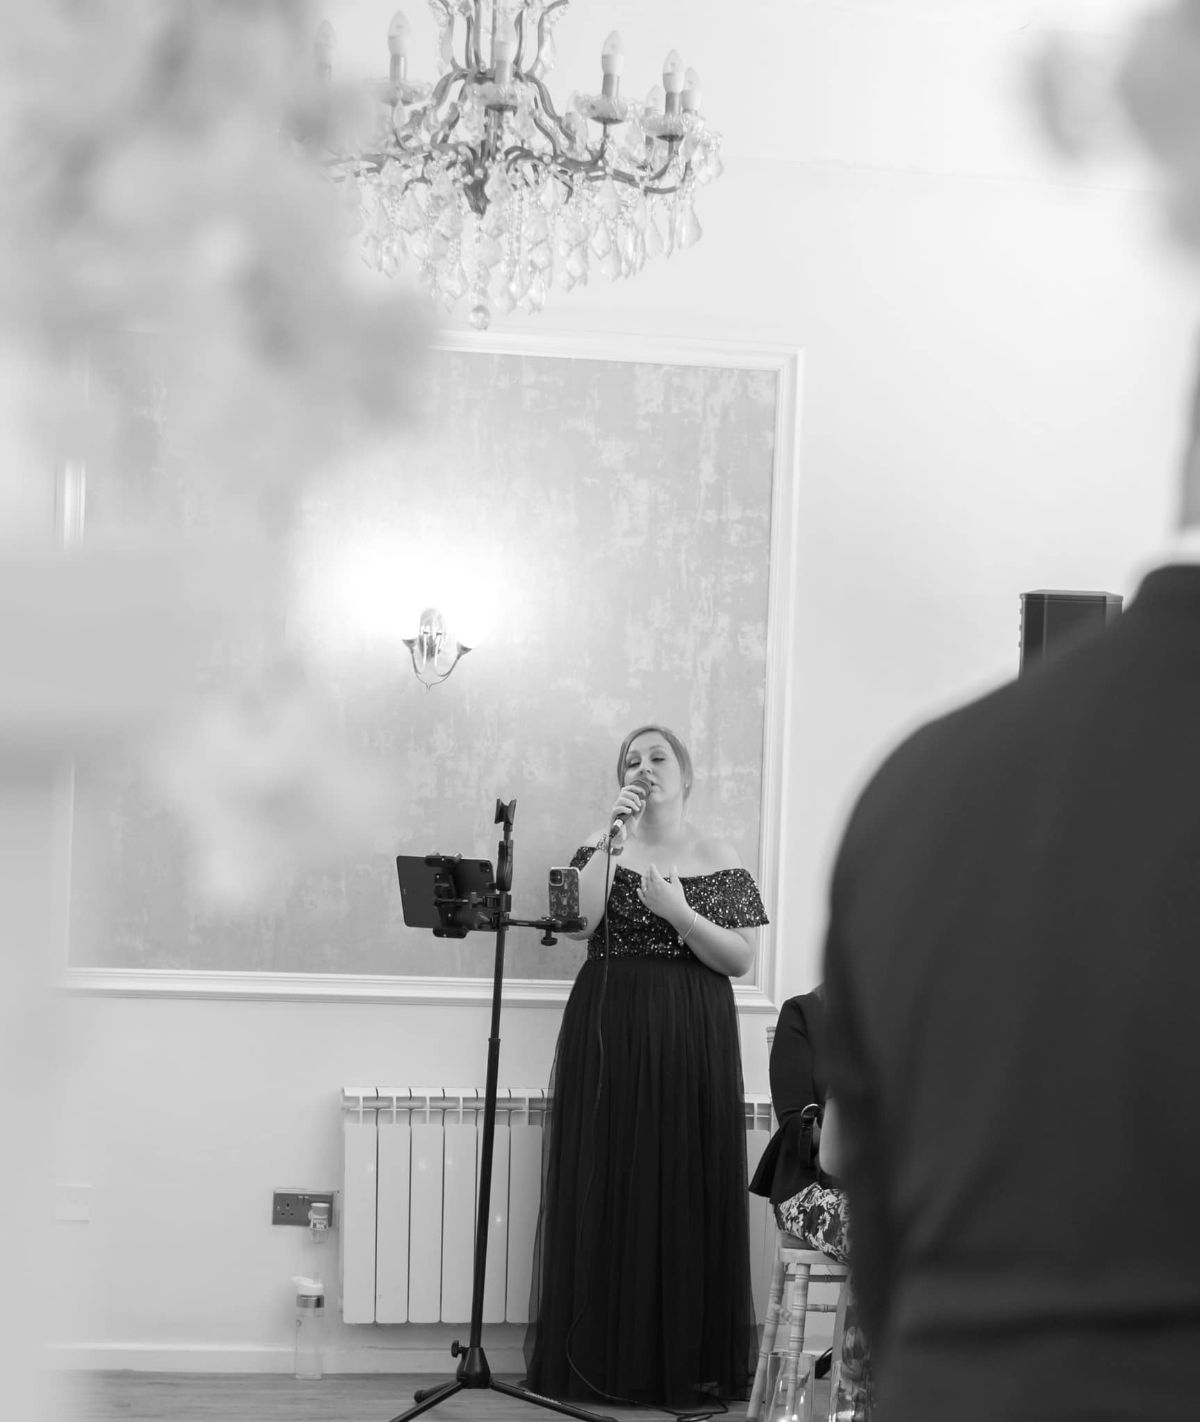 Singing during the ceremony